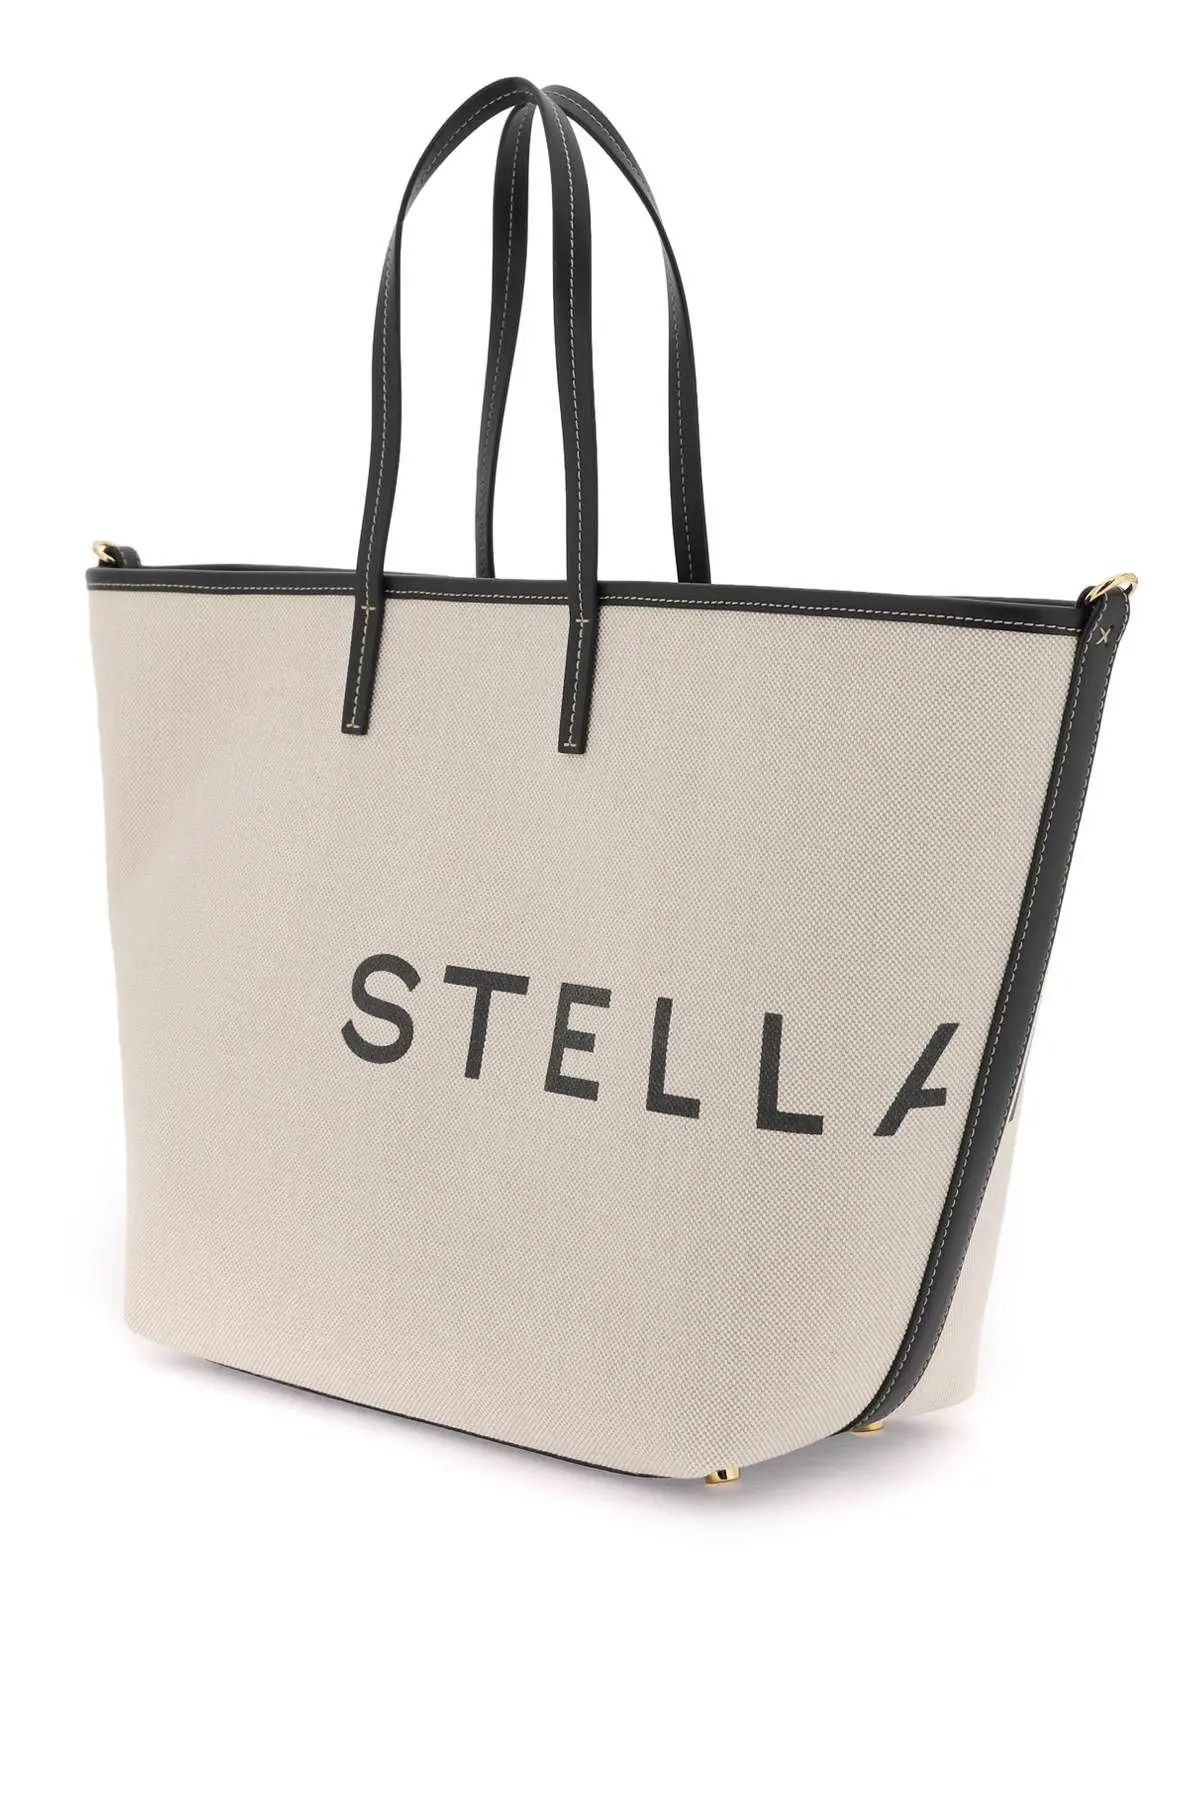 Stella McCartney o1s22i1n0823 Tote Bag in White Black Size ONE SIZE - 2 Preview